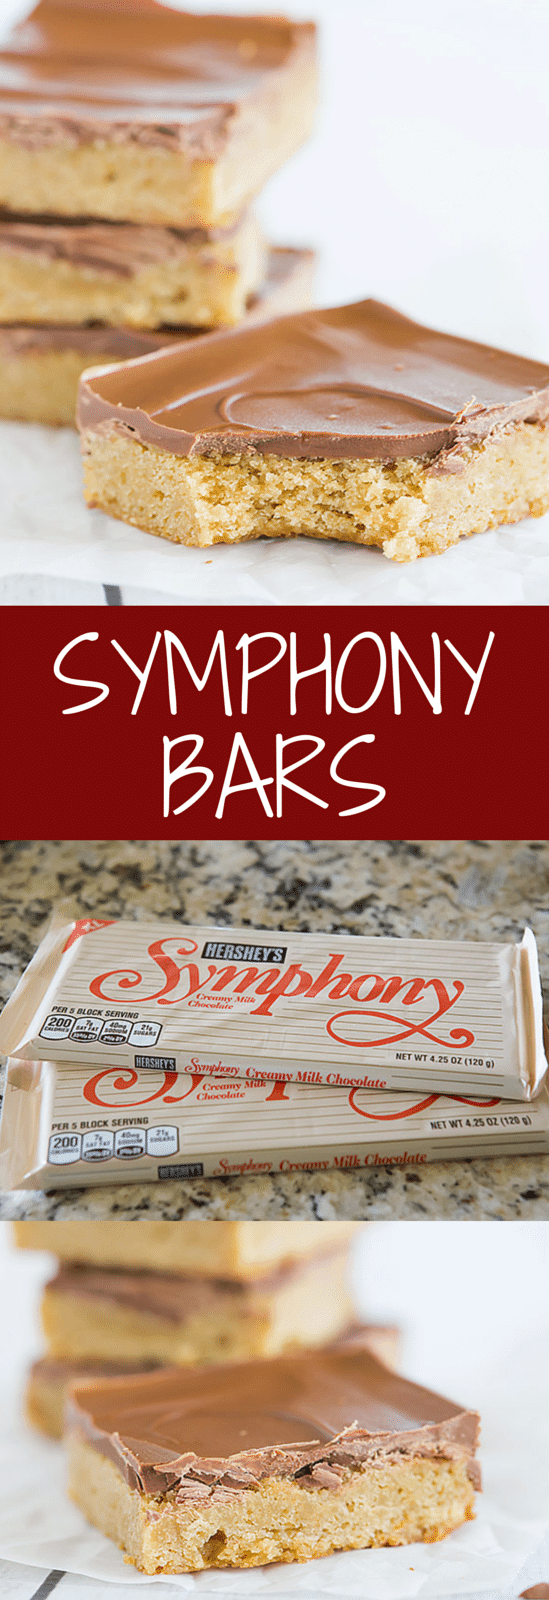 Symphony Bars - I revamped this recipe to use a stripped-down version of my favorite blondies as the base, then topped with broken-up Symphony chocolate bars and spread until they melt!